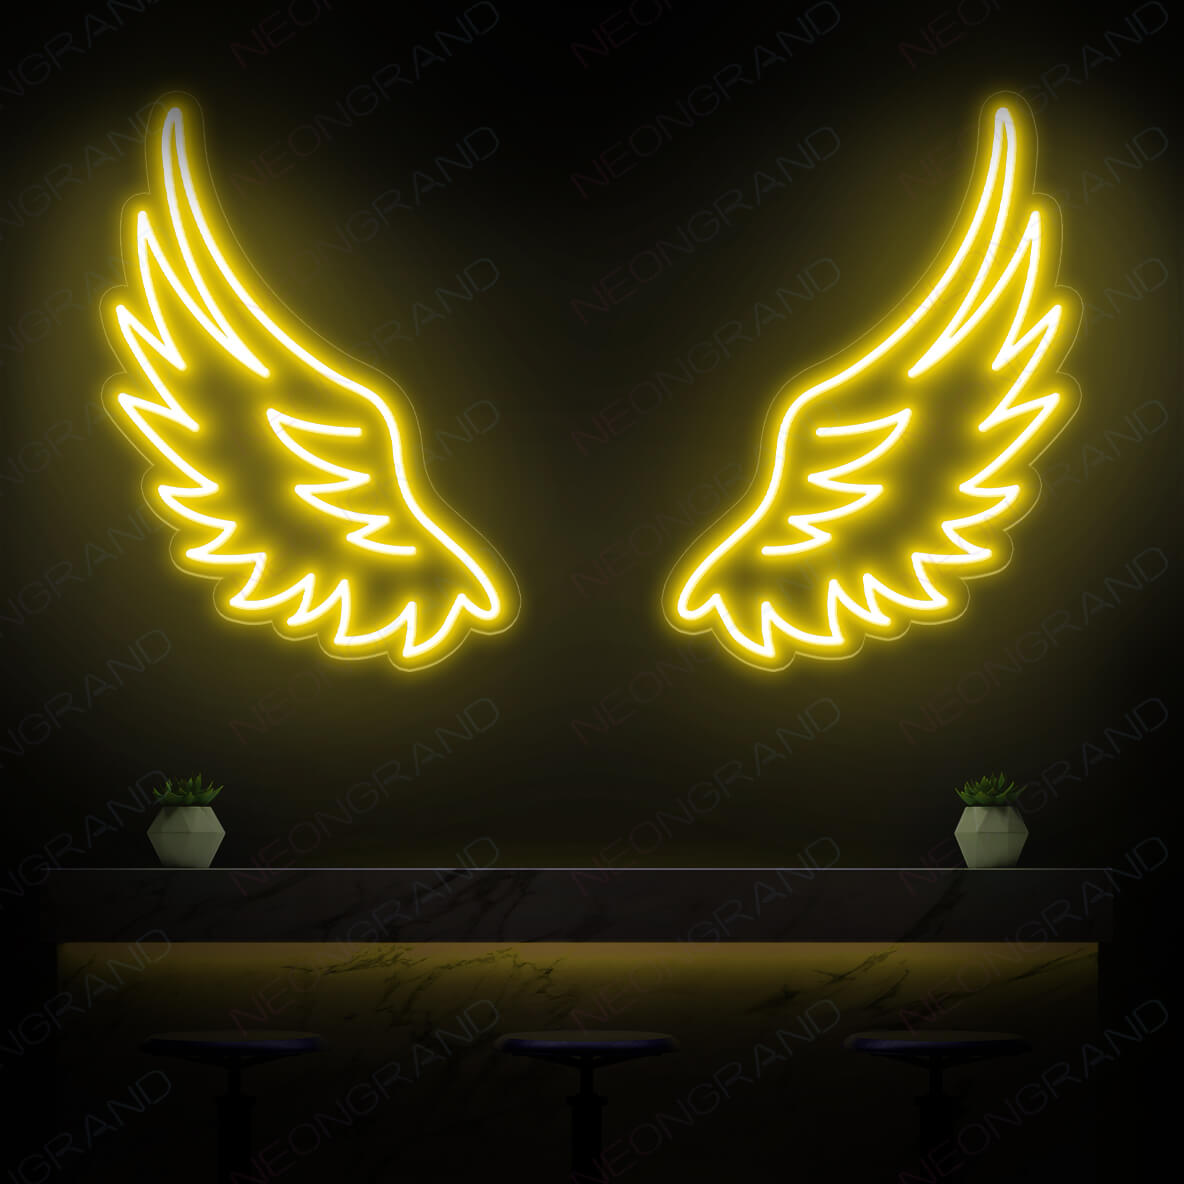 Angel Wings Neon Sign Led Light Bar Neon Signs Yellow